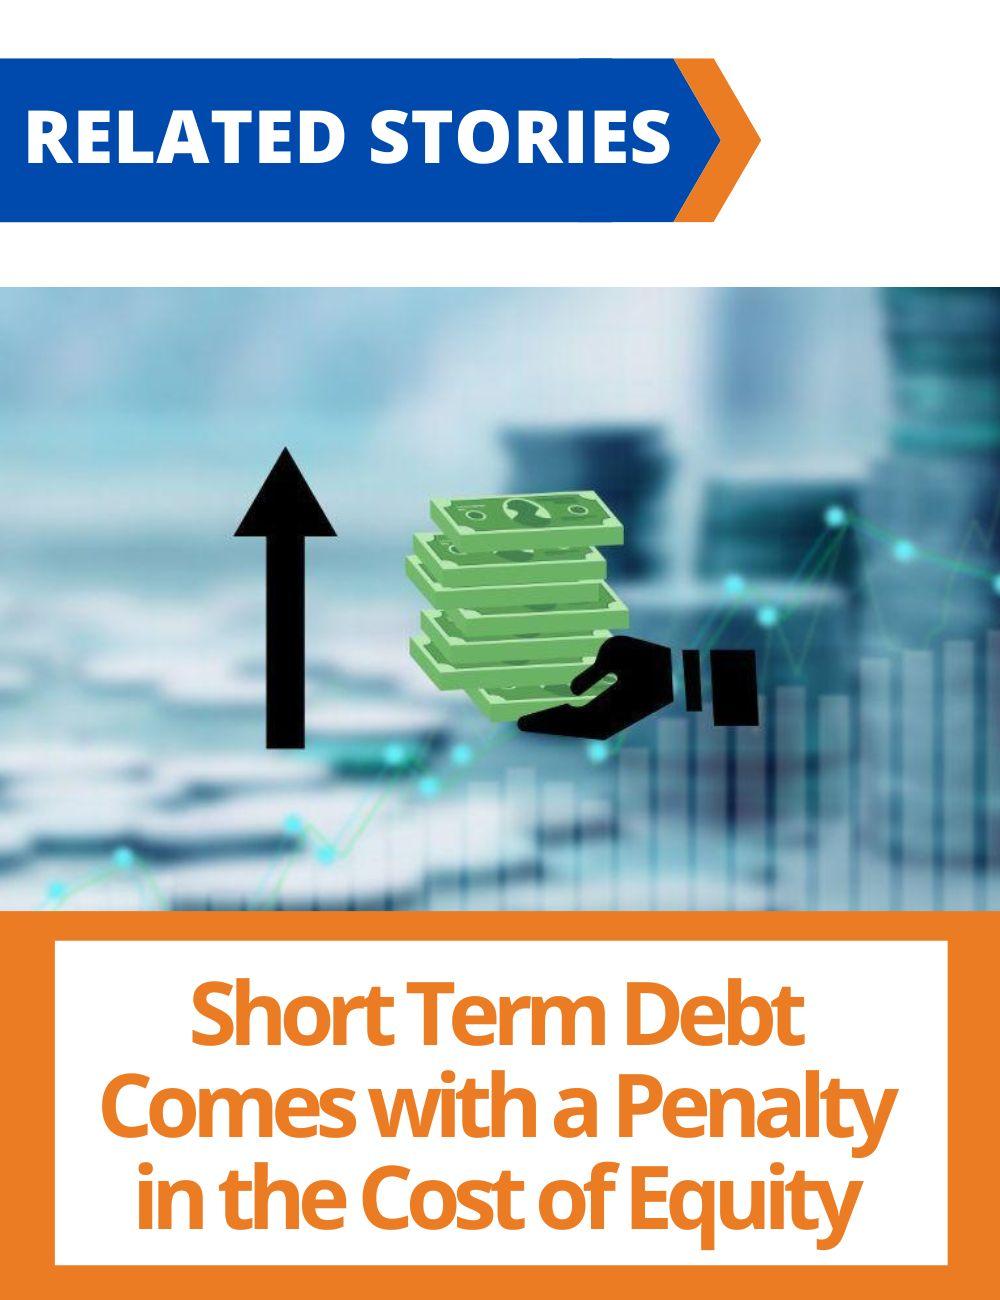 Link to related stories. Image: a hand holding money and an arrow pointing up. Story headline: Short Term Debt Comes with a Penalty in the Cost of Equity